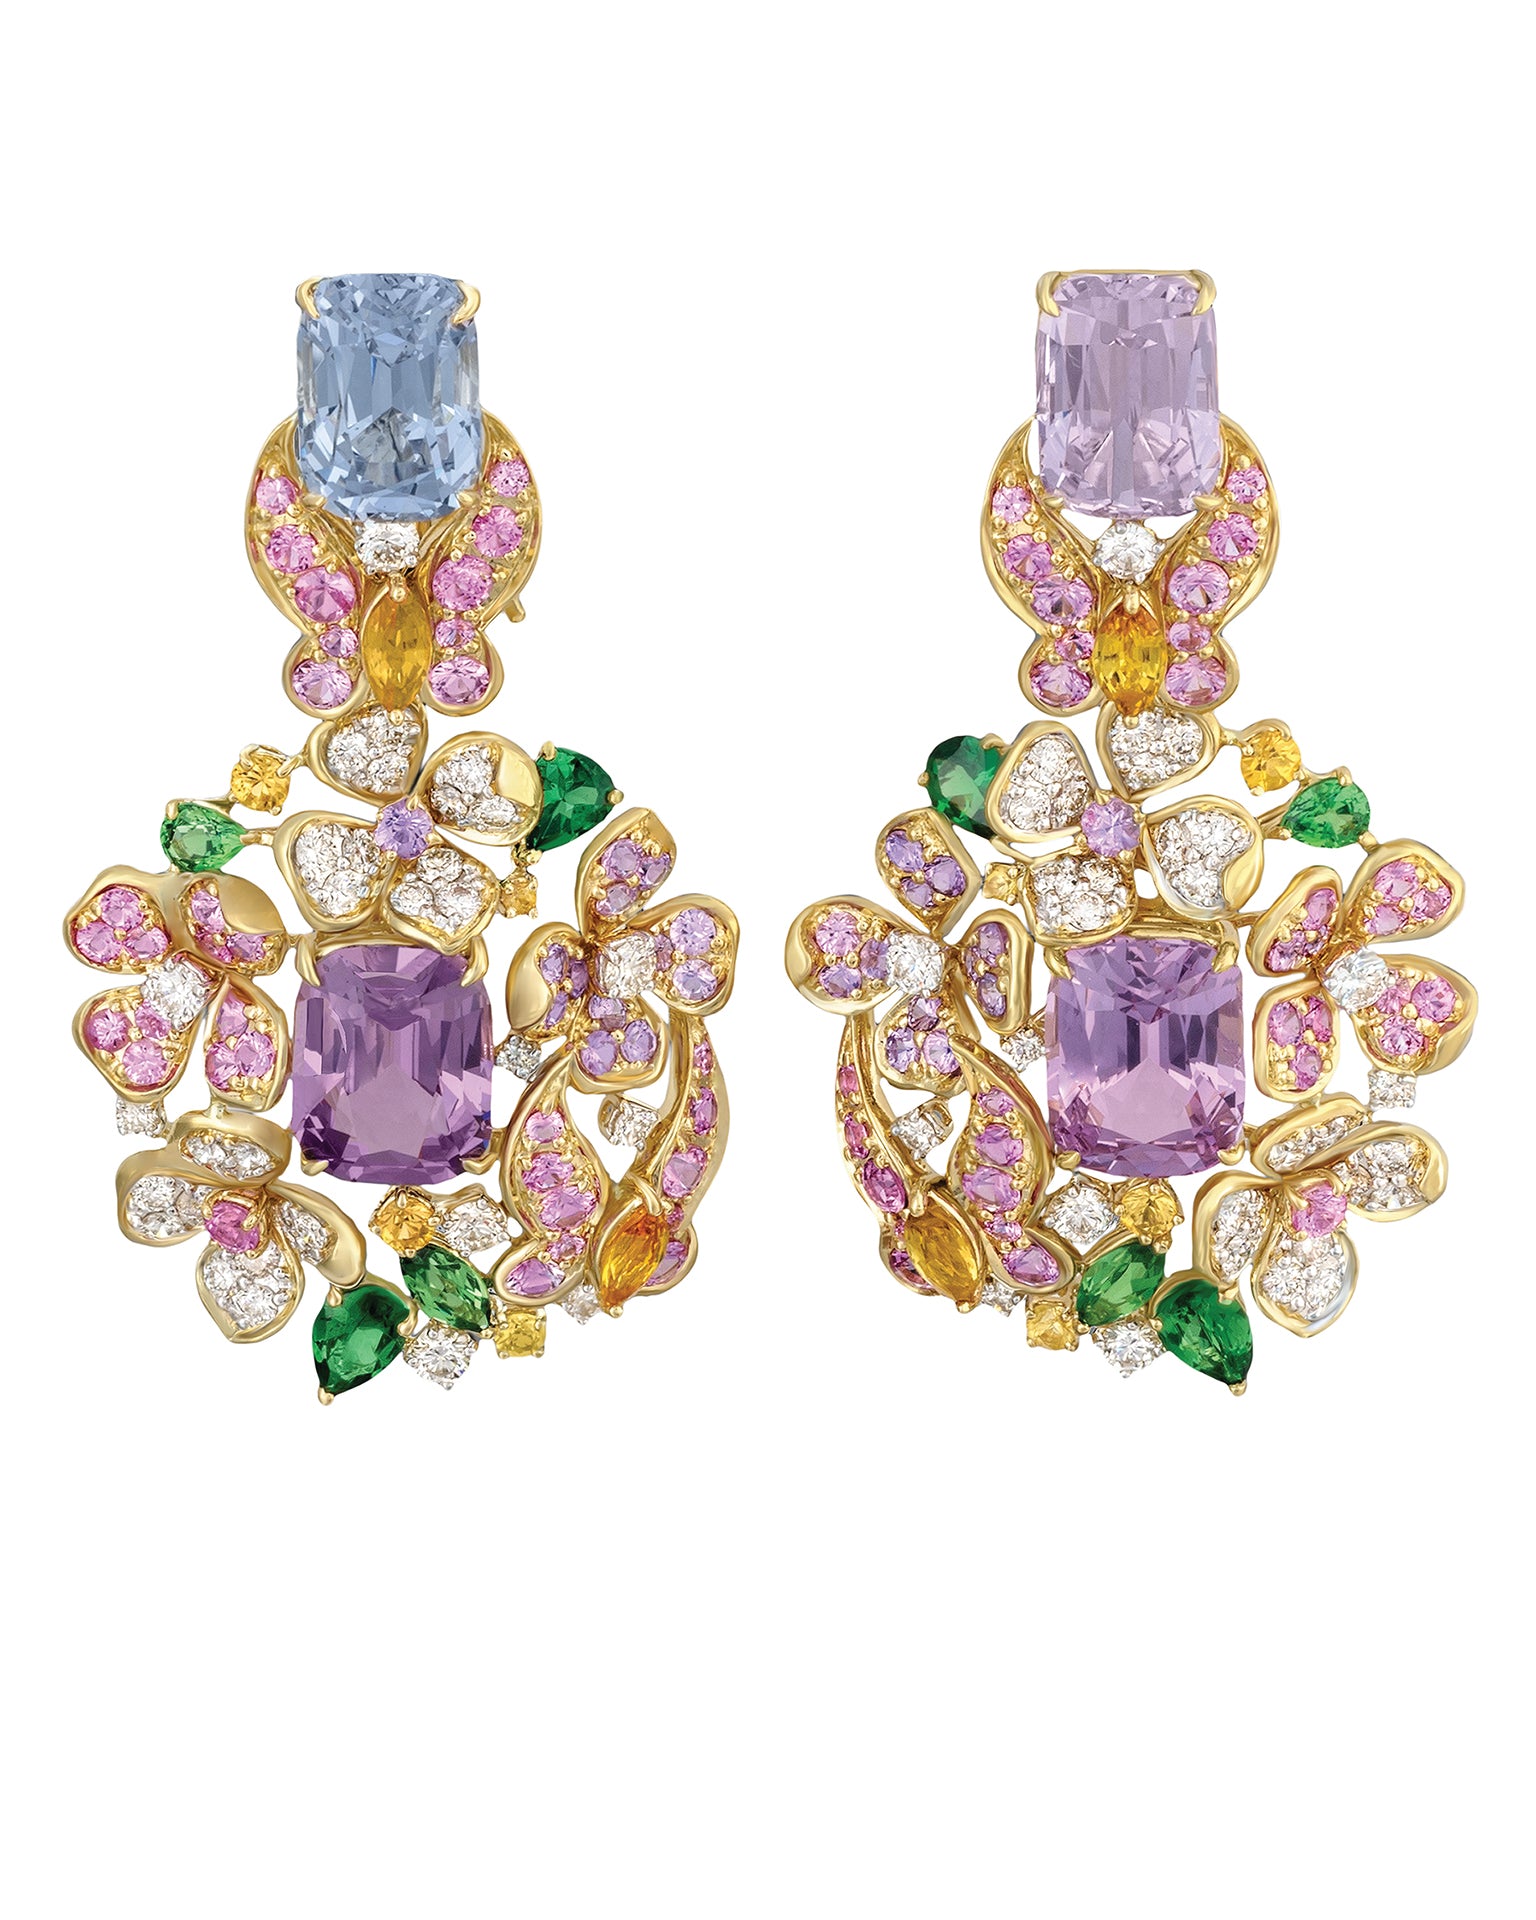 "Papillon" pink, purple, and violet spinels  surrounded by butterflies and flowers with a myriad of sapphires, tsavorite garnets and diamonds, crafted in 18 karat yellow gold.